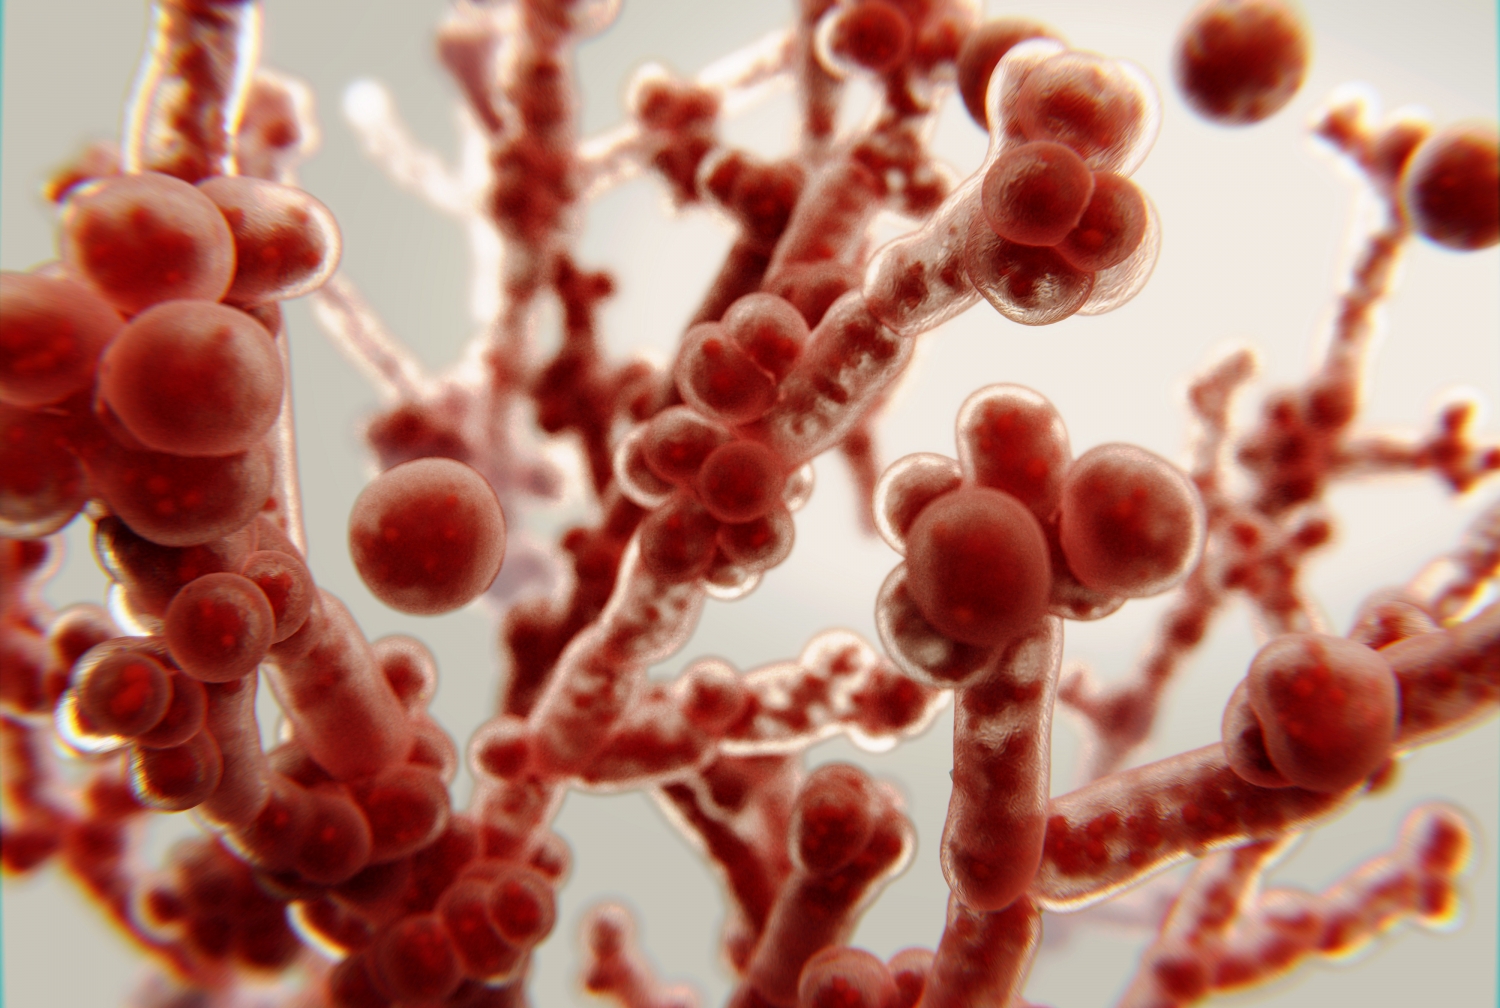 3D rendering of candida albicans